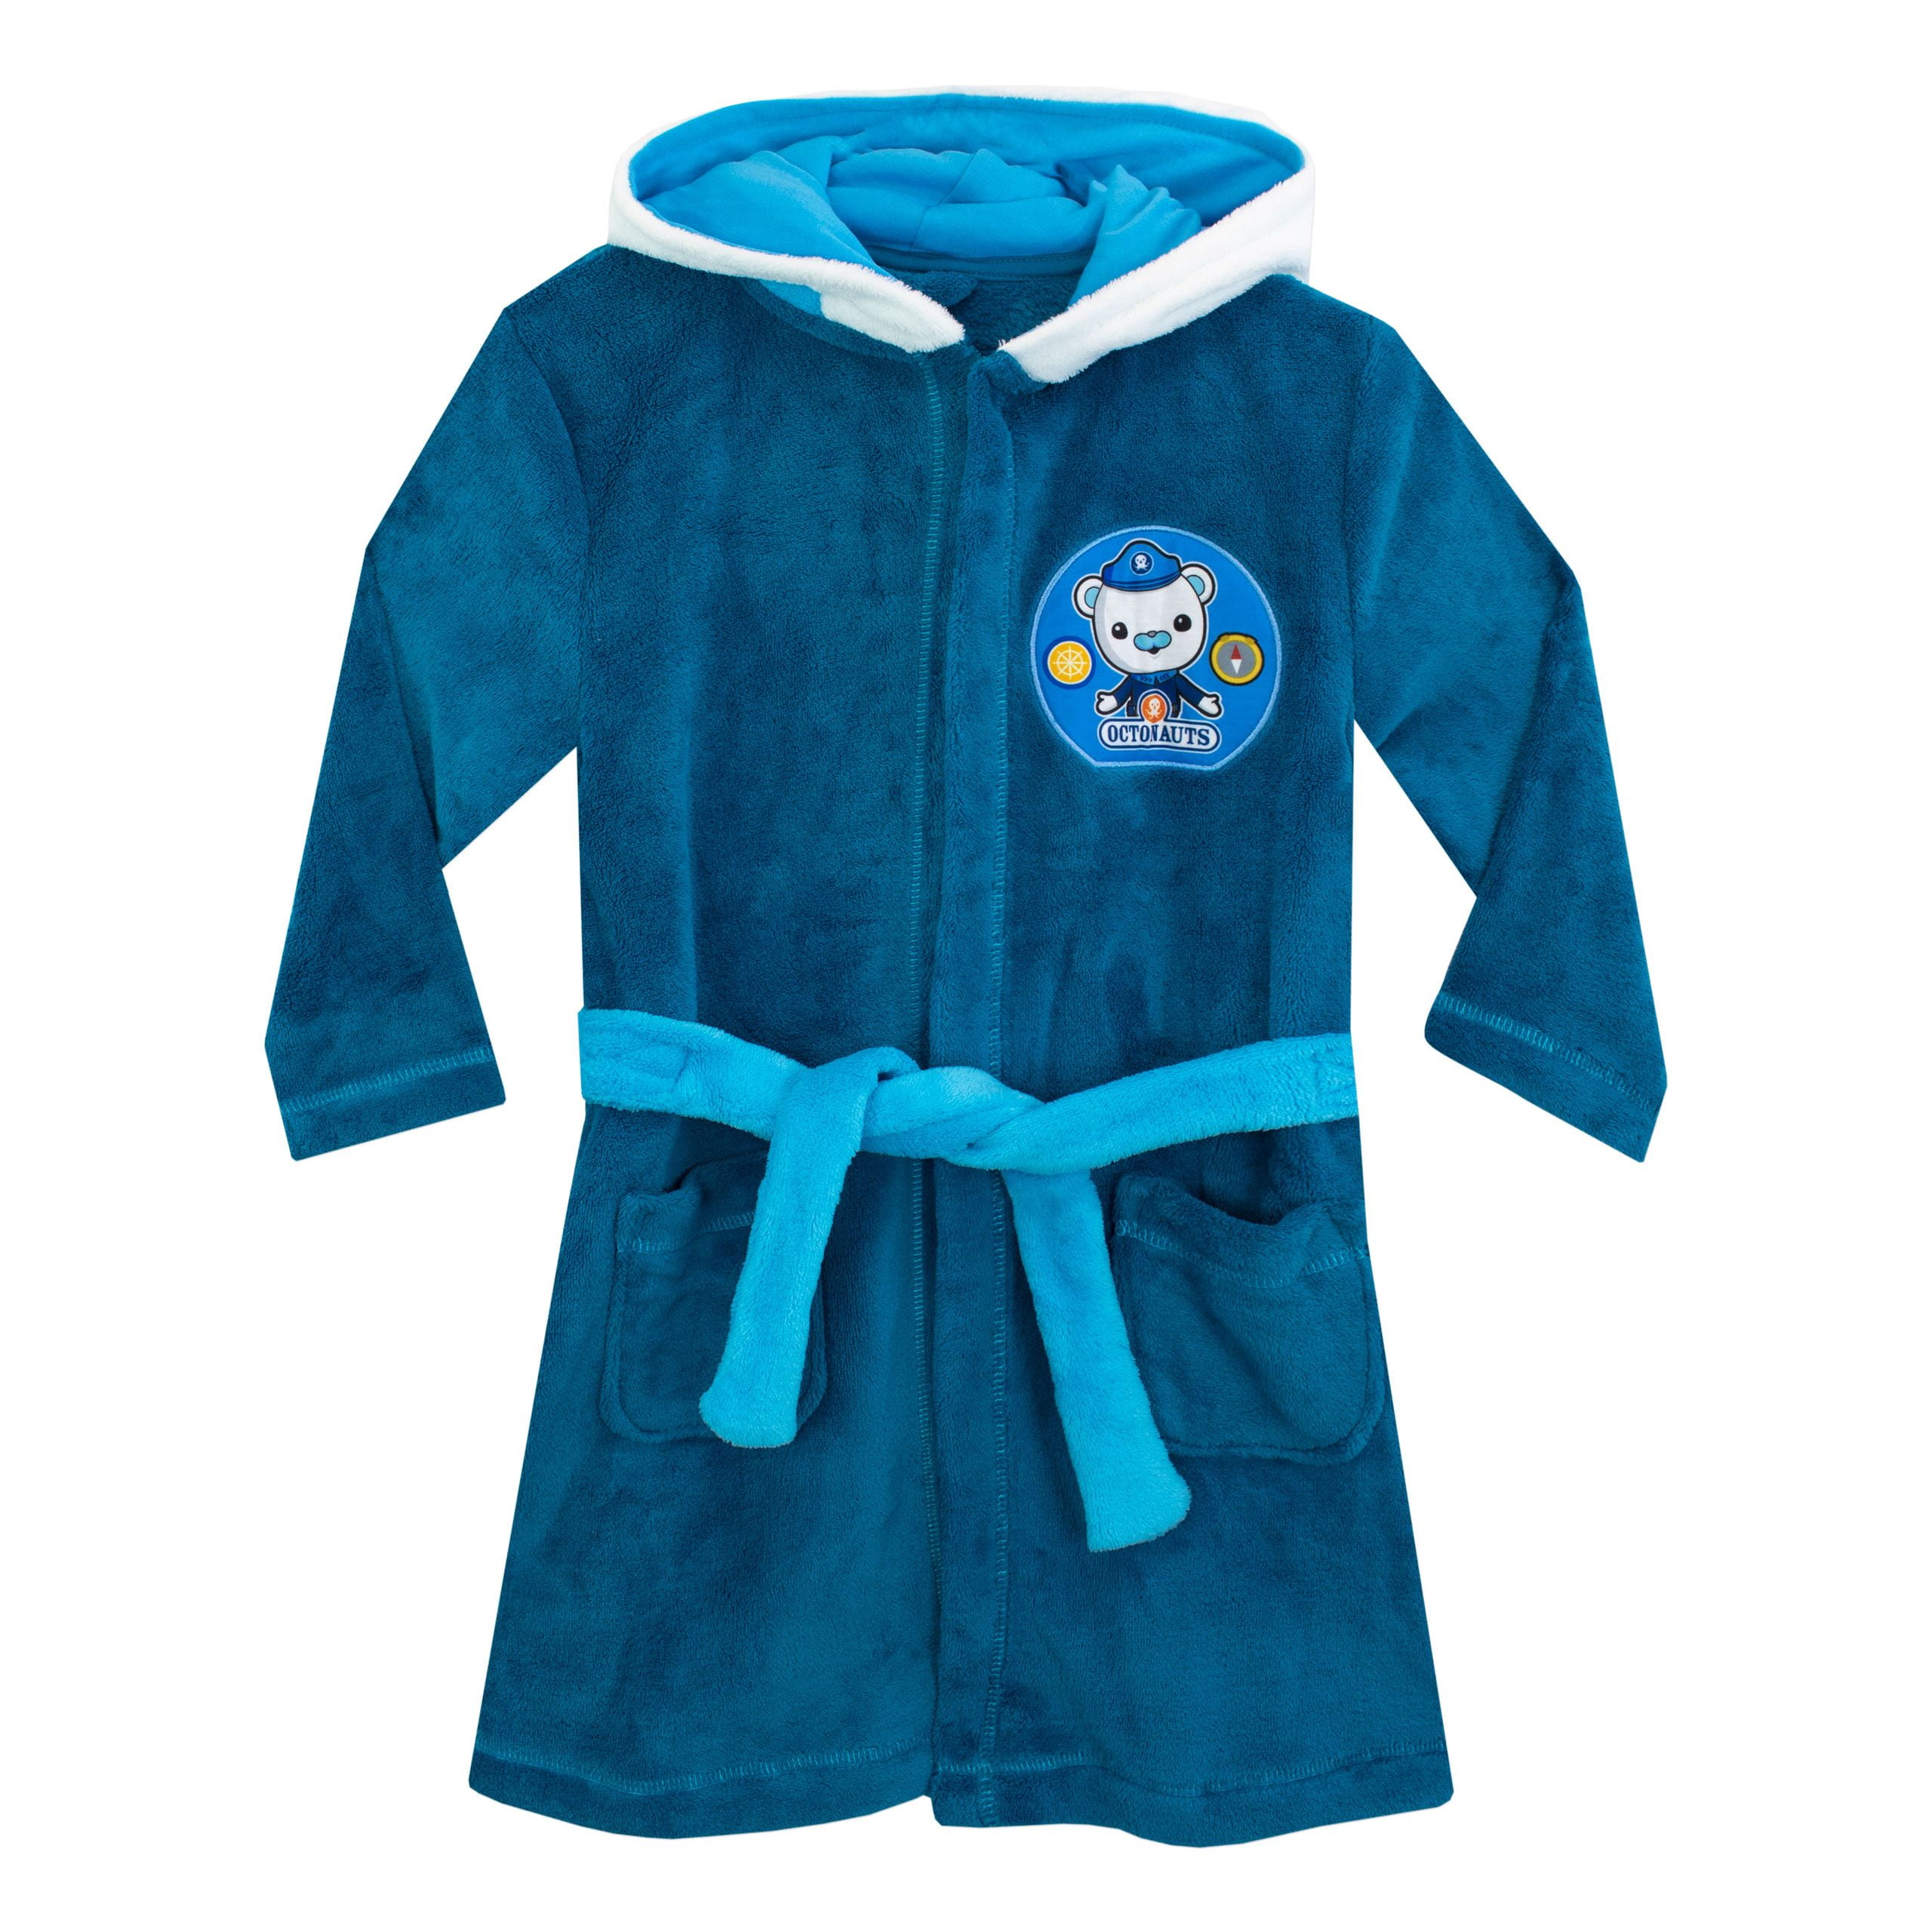 Venus Youth Dressing Gown (Charcoal) – Wigan Athletic FC